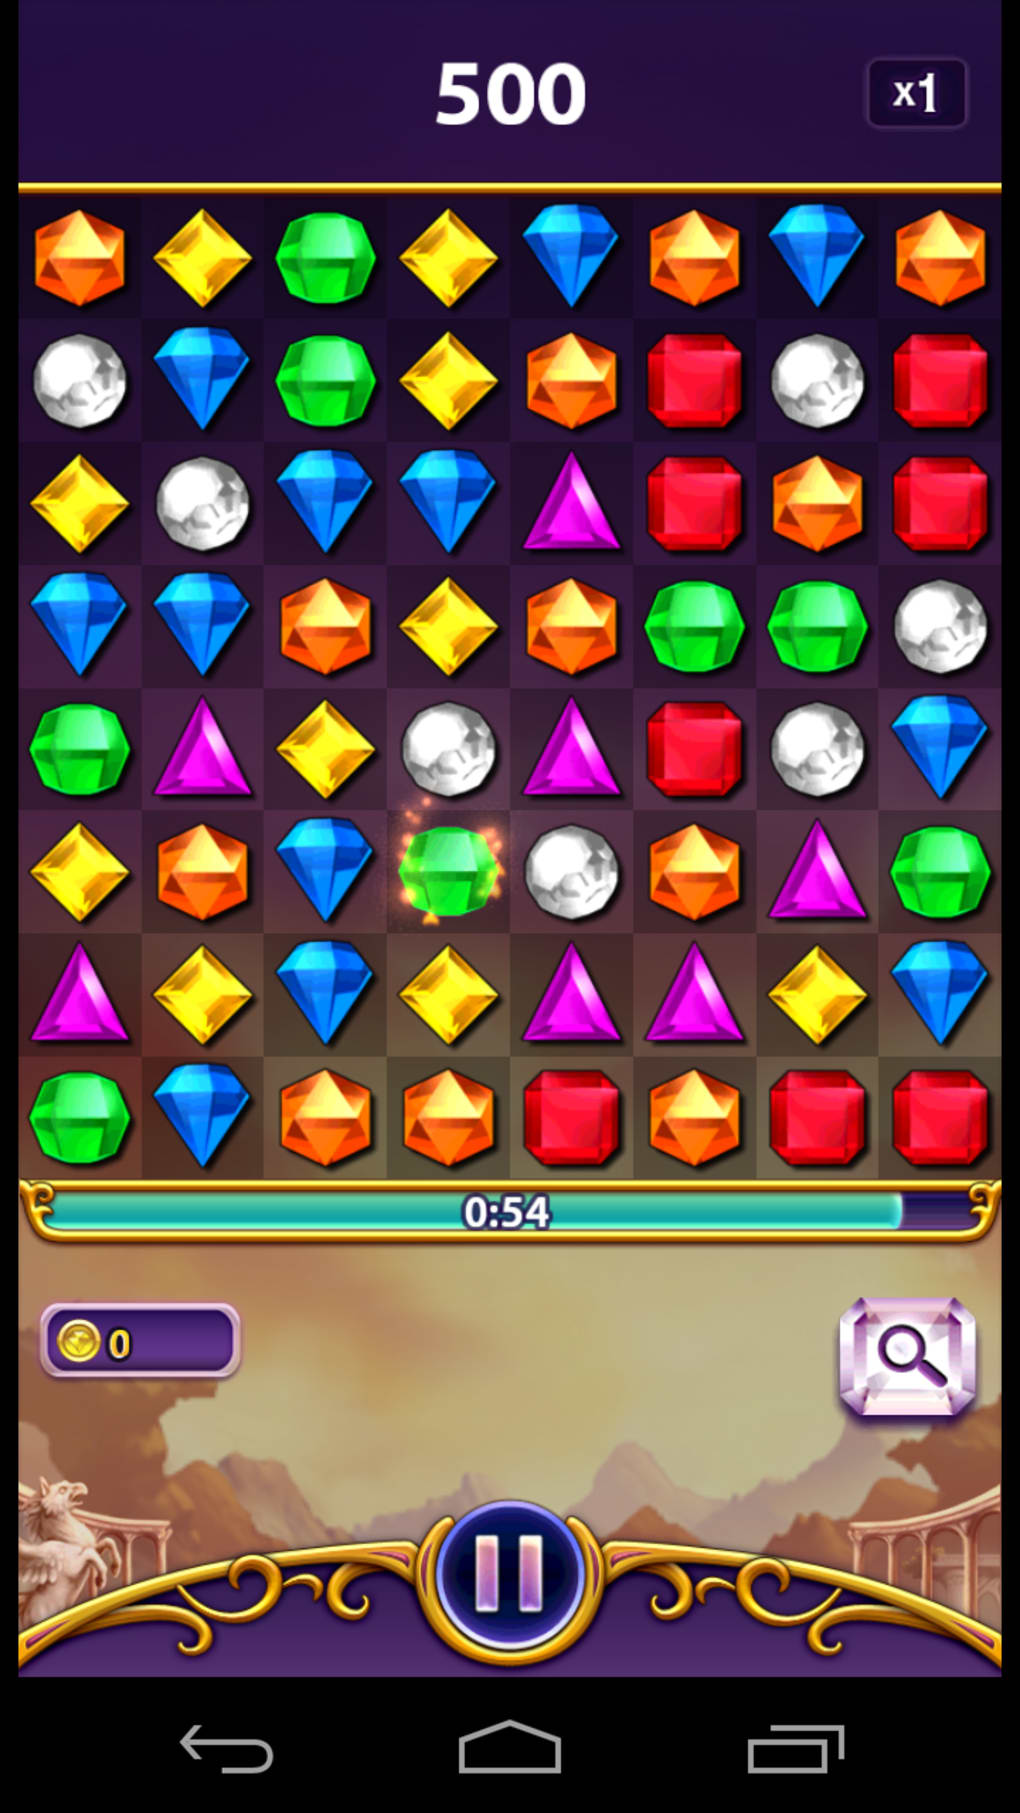 bejeweled blitz daily spin 1 million